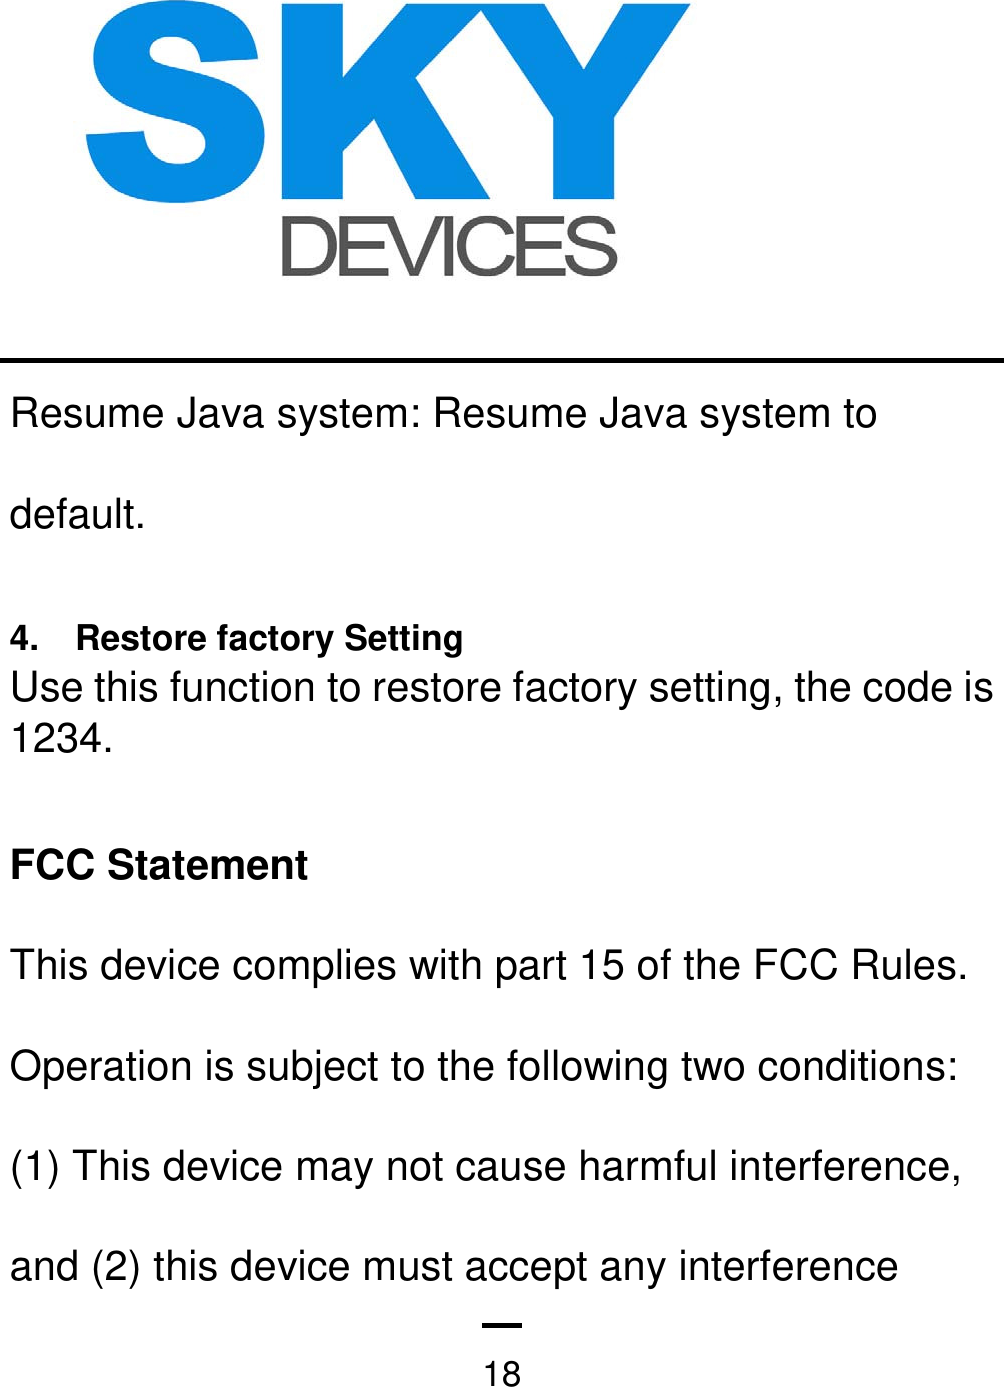   18Resume Java system: Resume Java system to default.  4.    Restore factory Setting Use this function to restore factory setting, the code is 1234.  FCC Statement This device complies with part 15 of the FCC Rules. Operation is subject to the following two conditions: (1) This device may not cause harmful interference, and (2) this device must accept any interference 